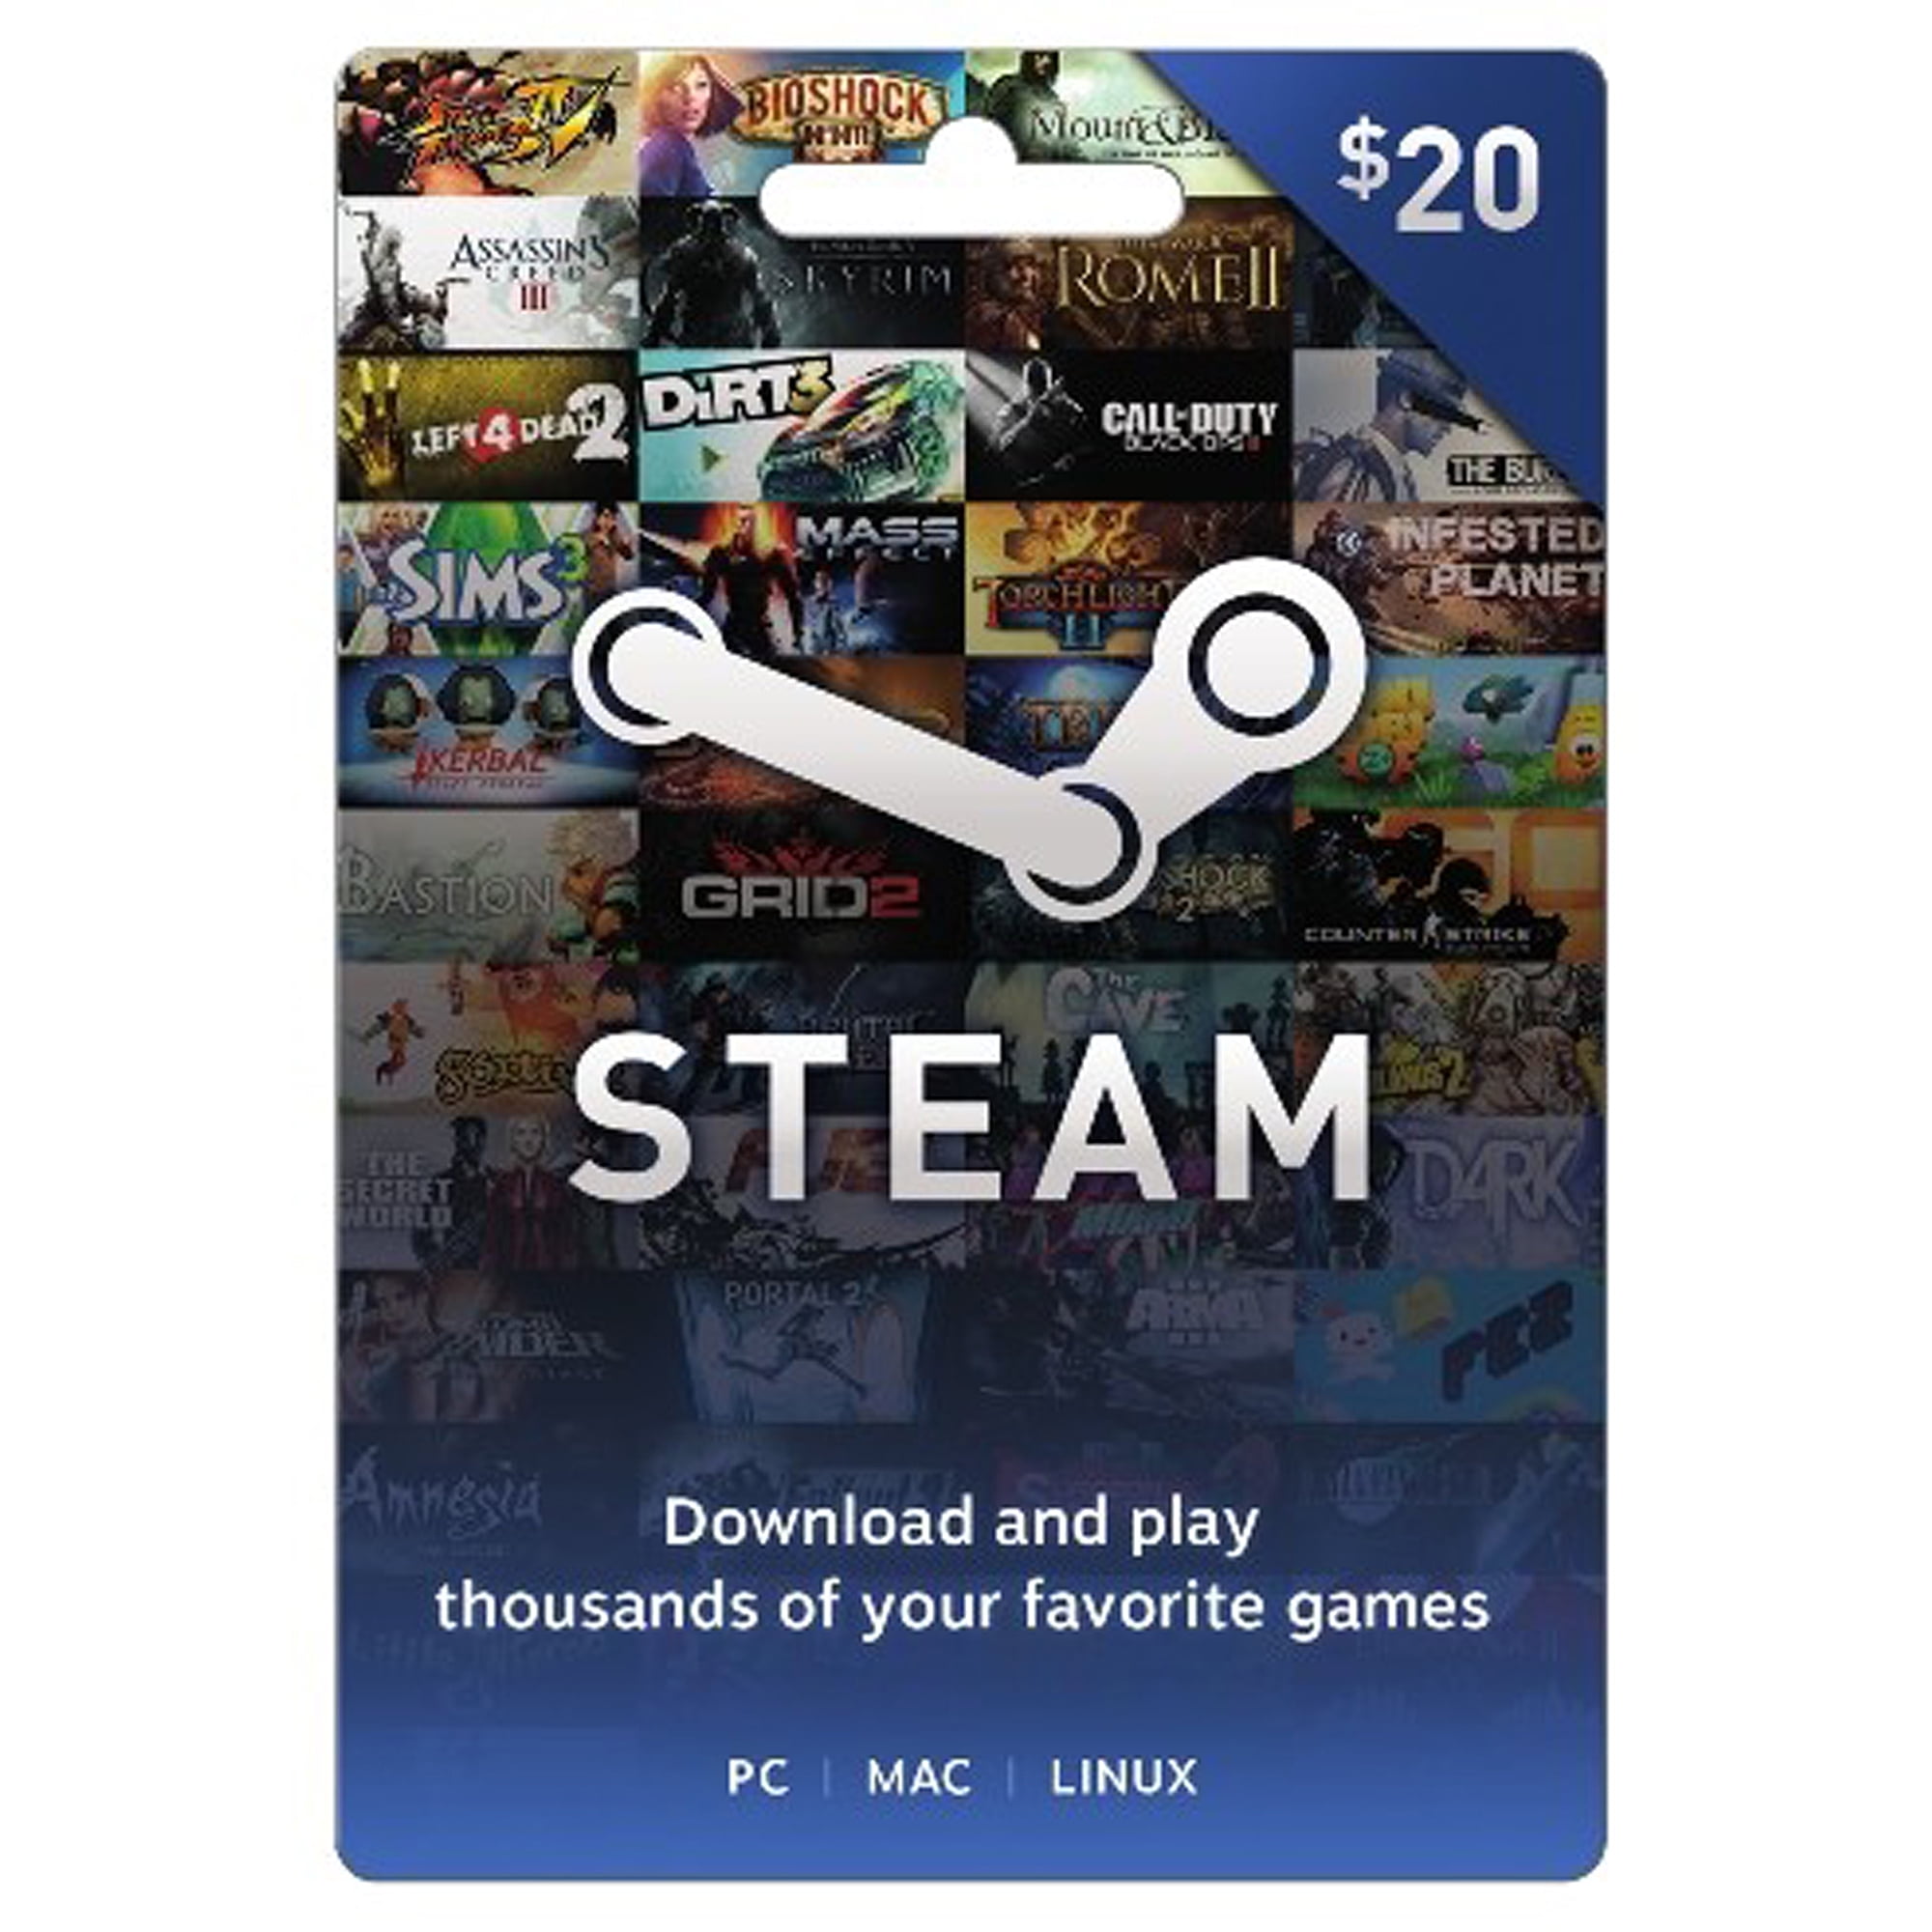 Cardyard - Buy Discounted Steam Gift Cards Online